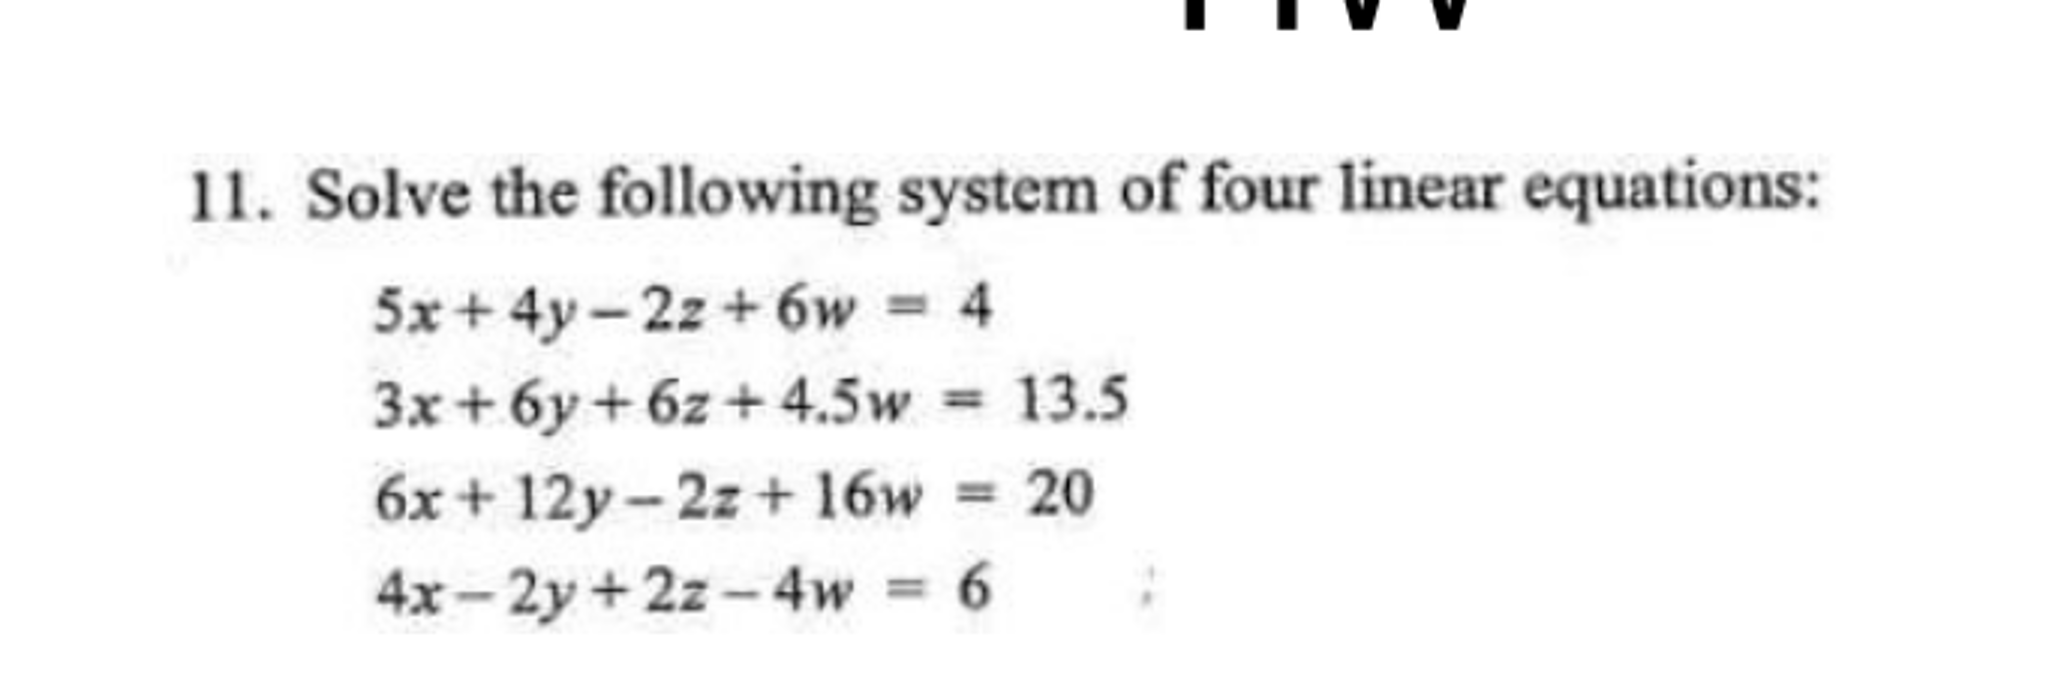 using four equations to solve a problem is called a four order system